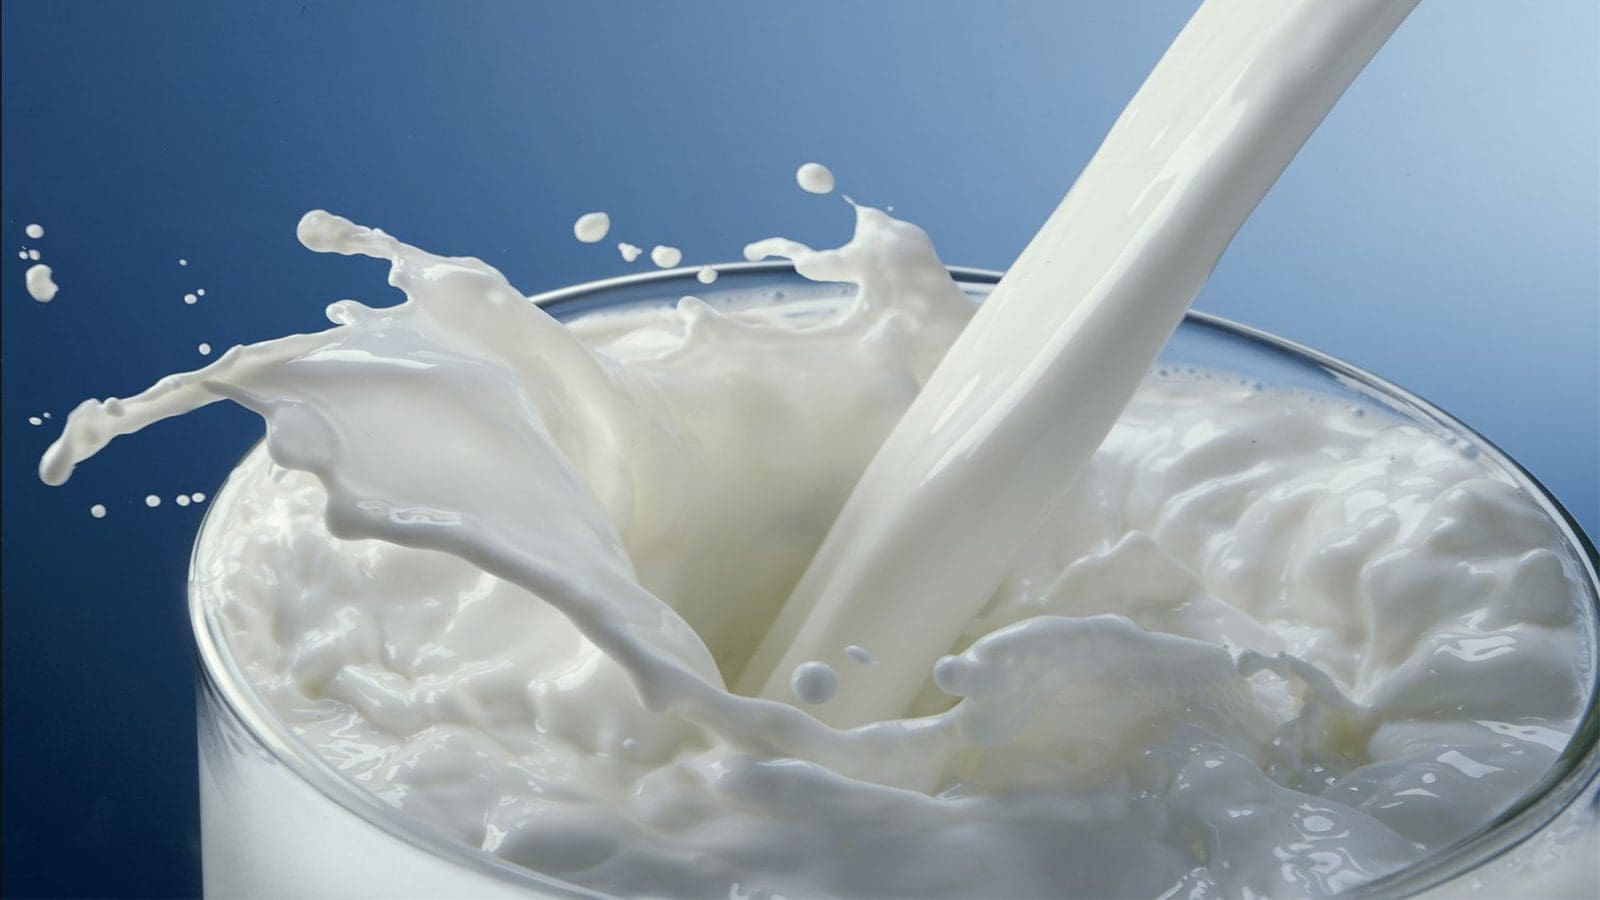 FSSAI finds 35% of milk samples tested contaminated